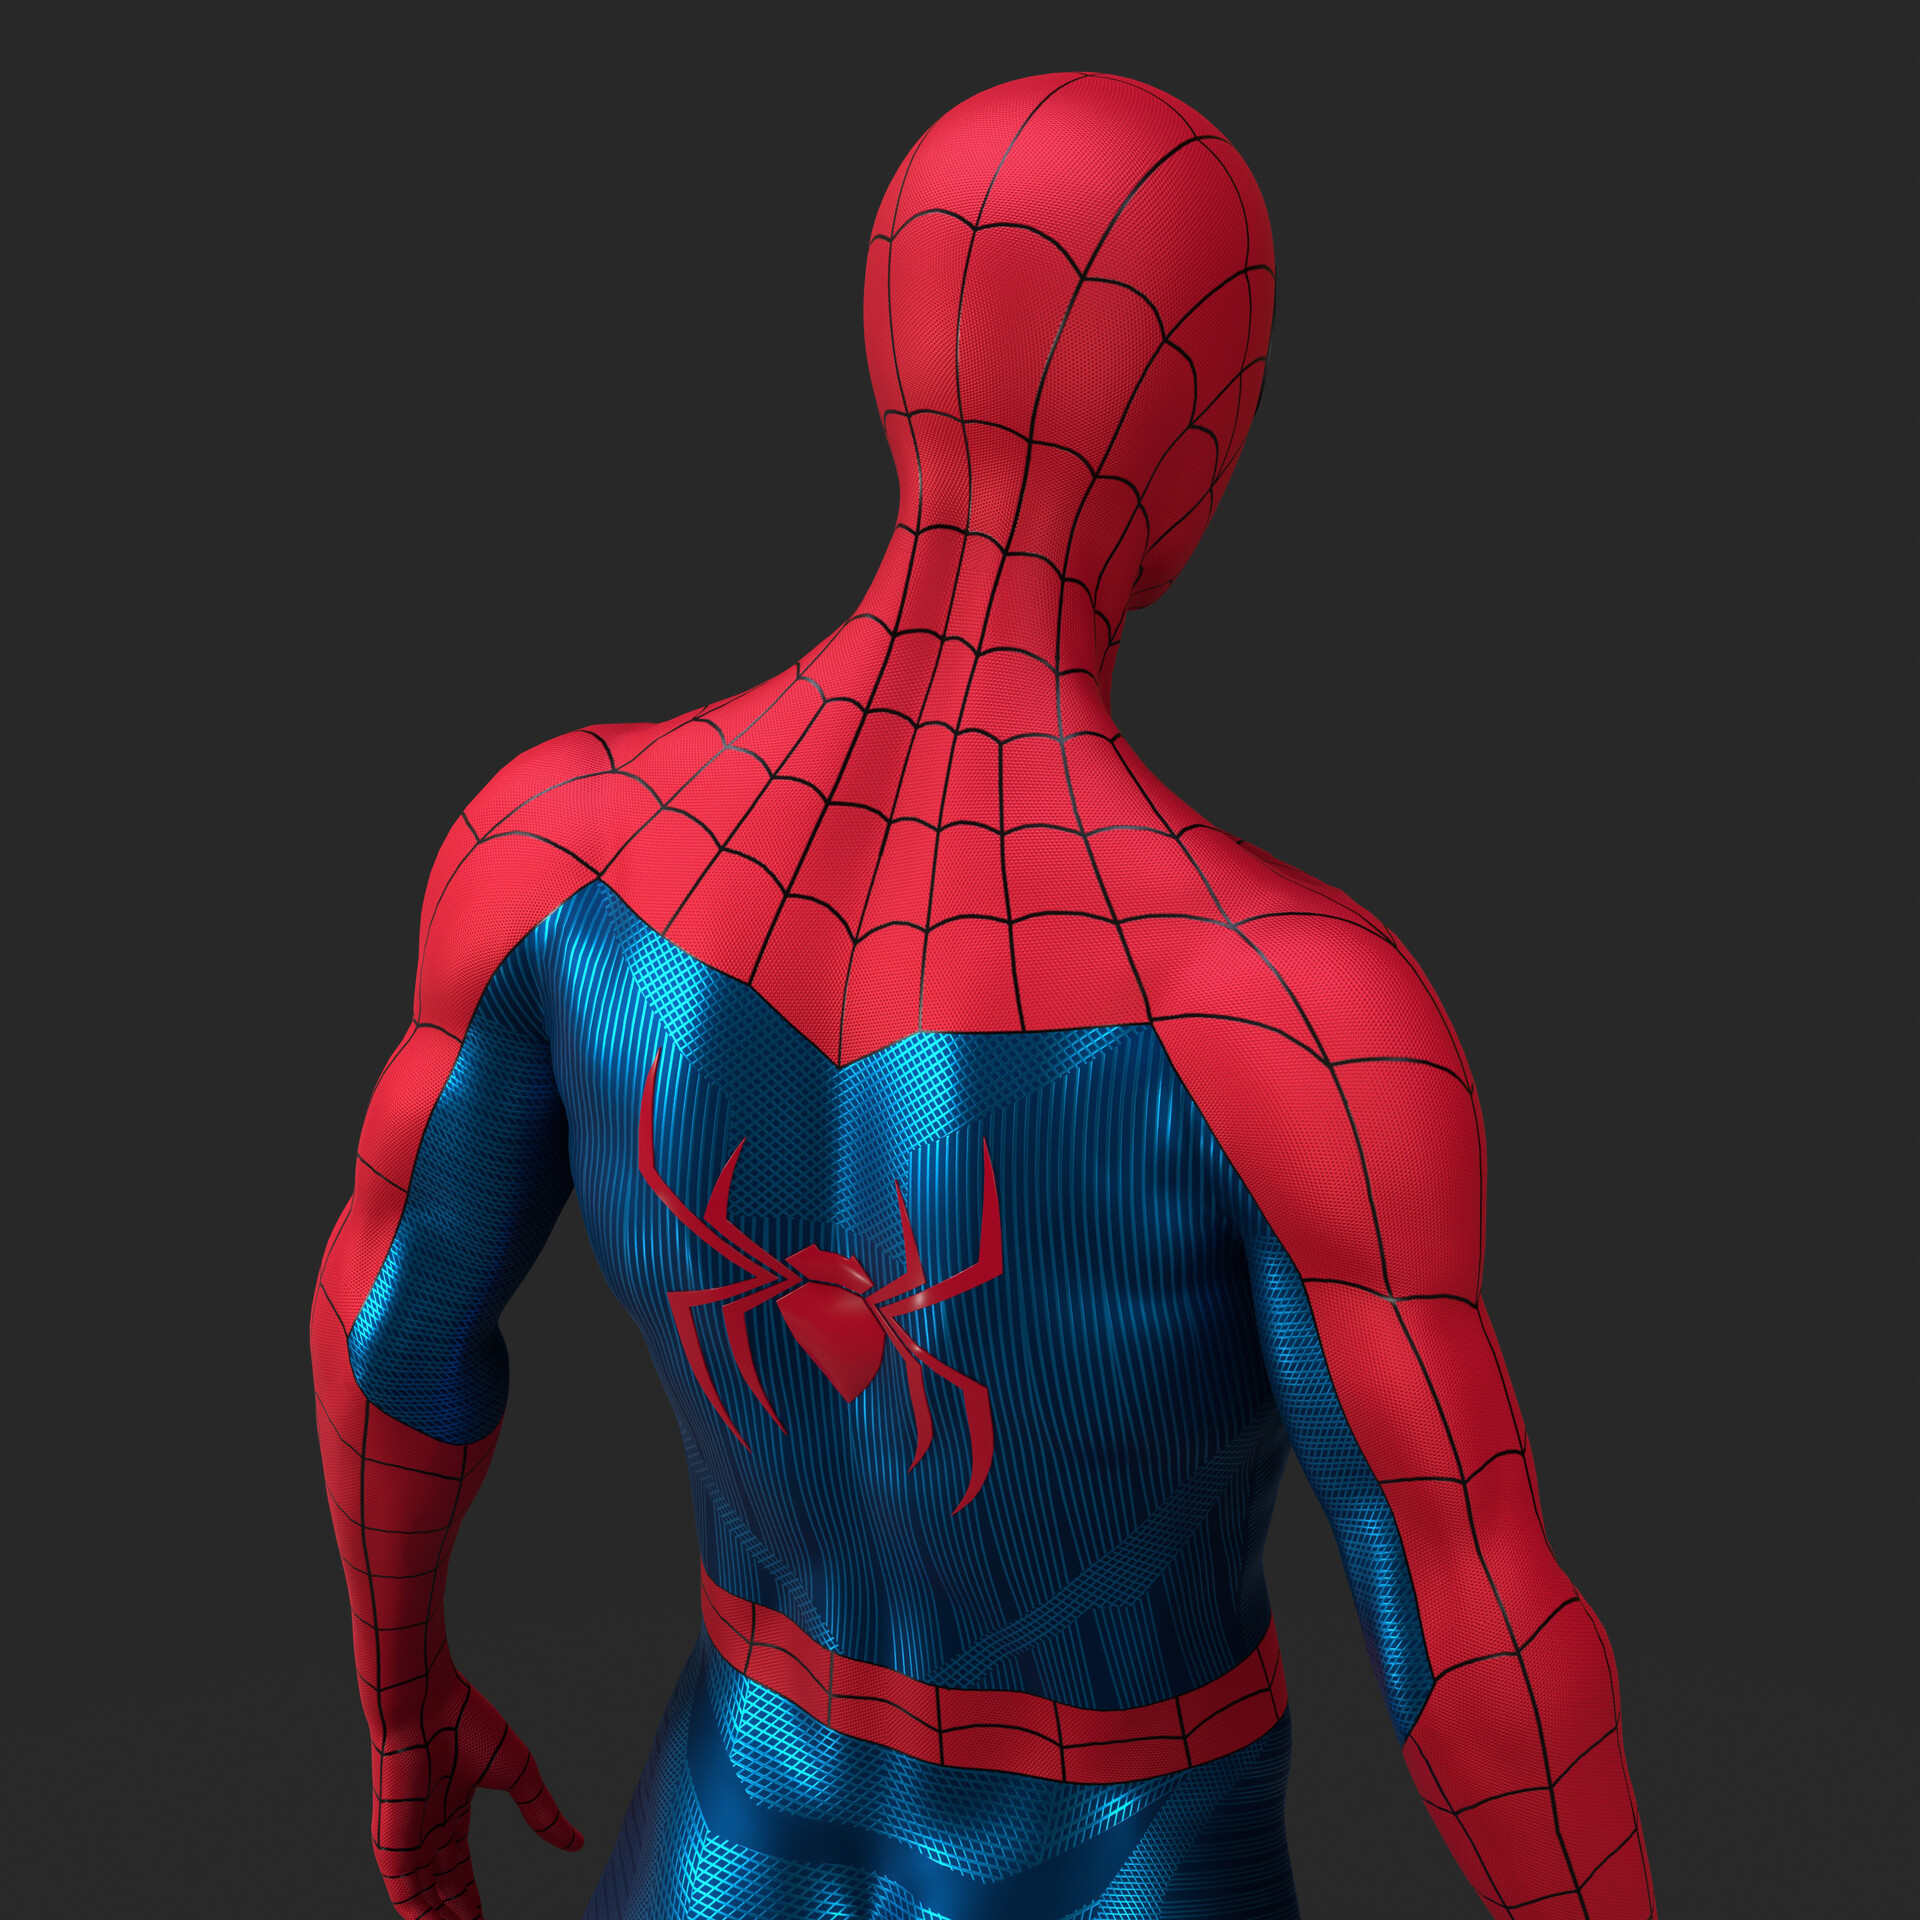 ArtStation - Design Passes for Spider-Man: Homecoming Suit